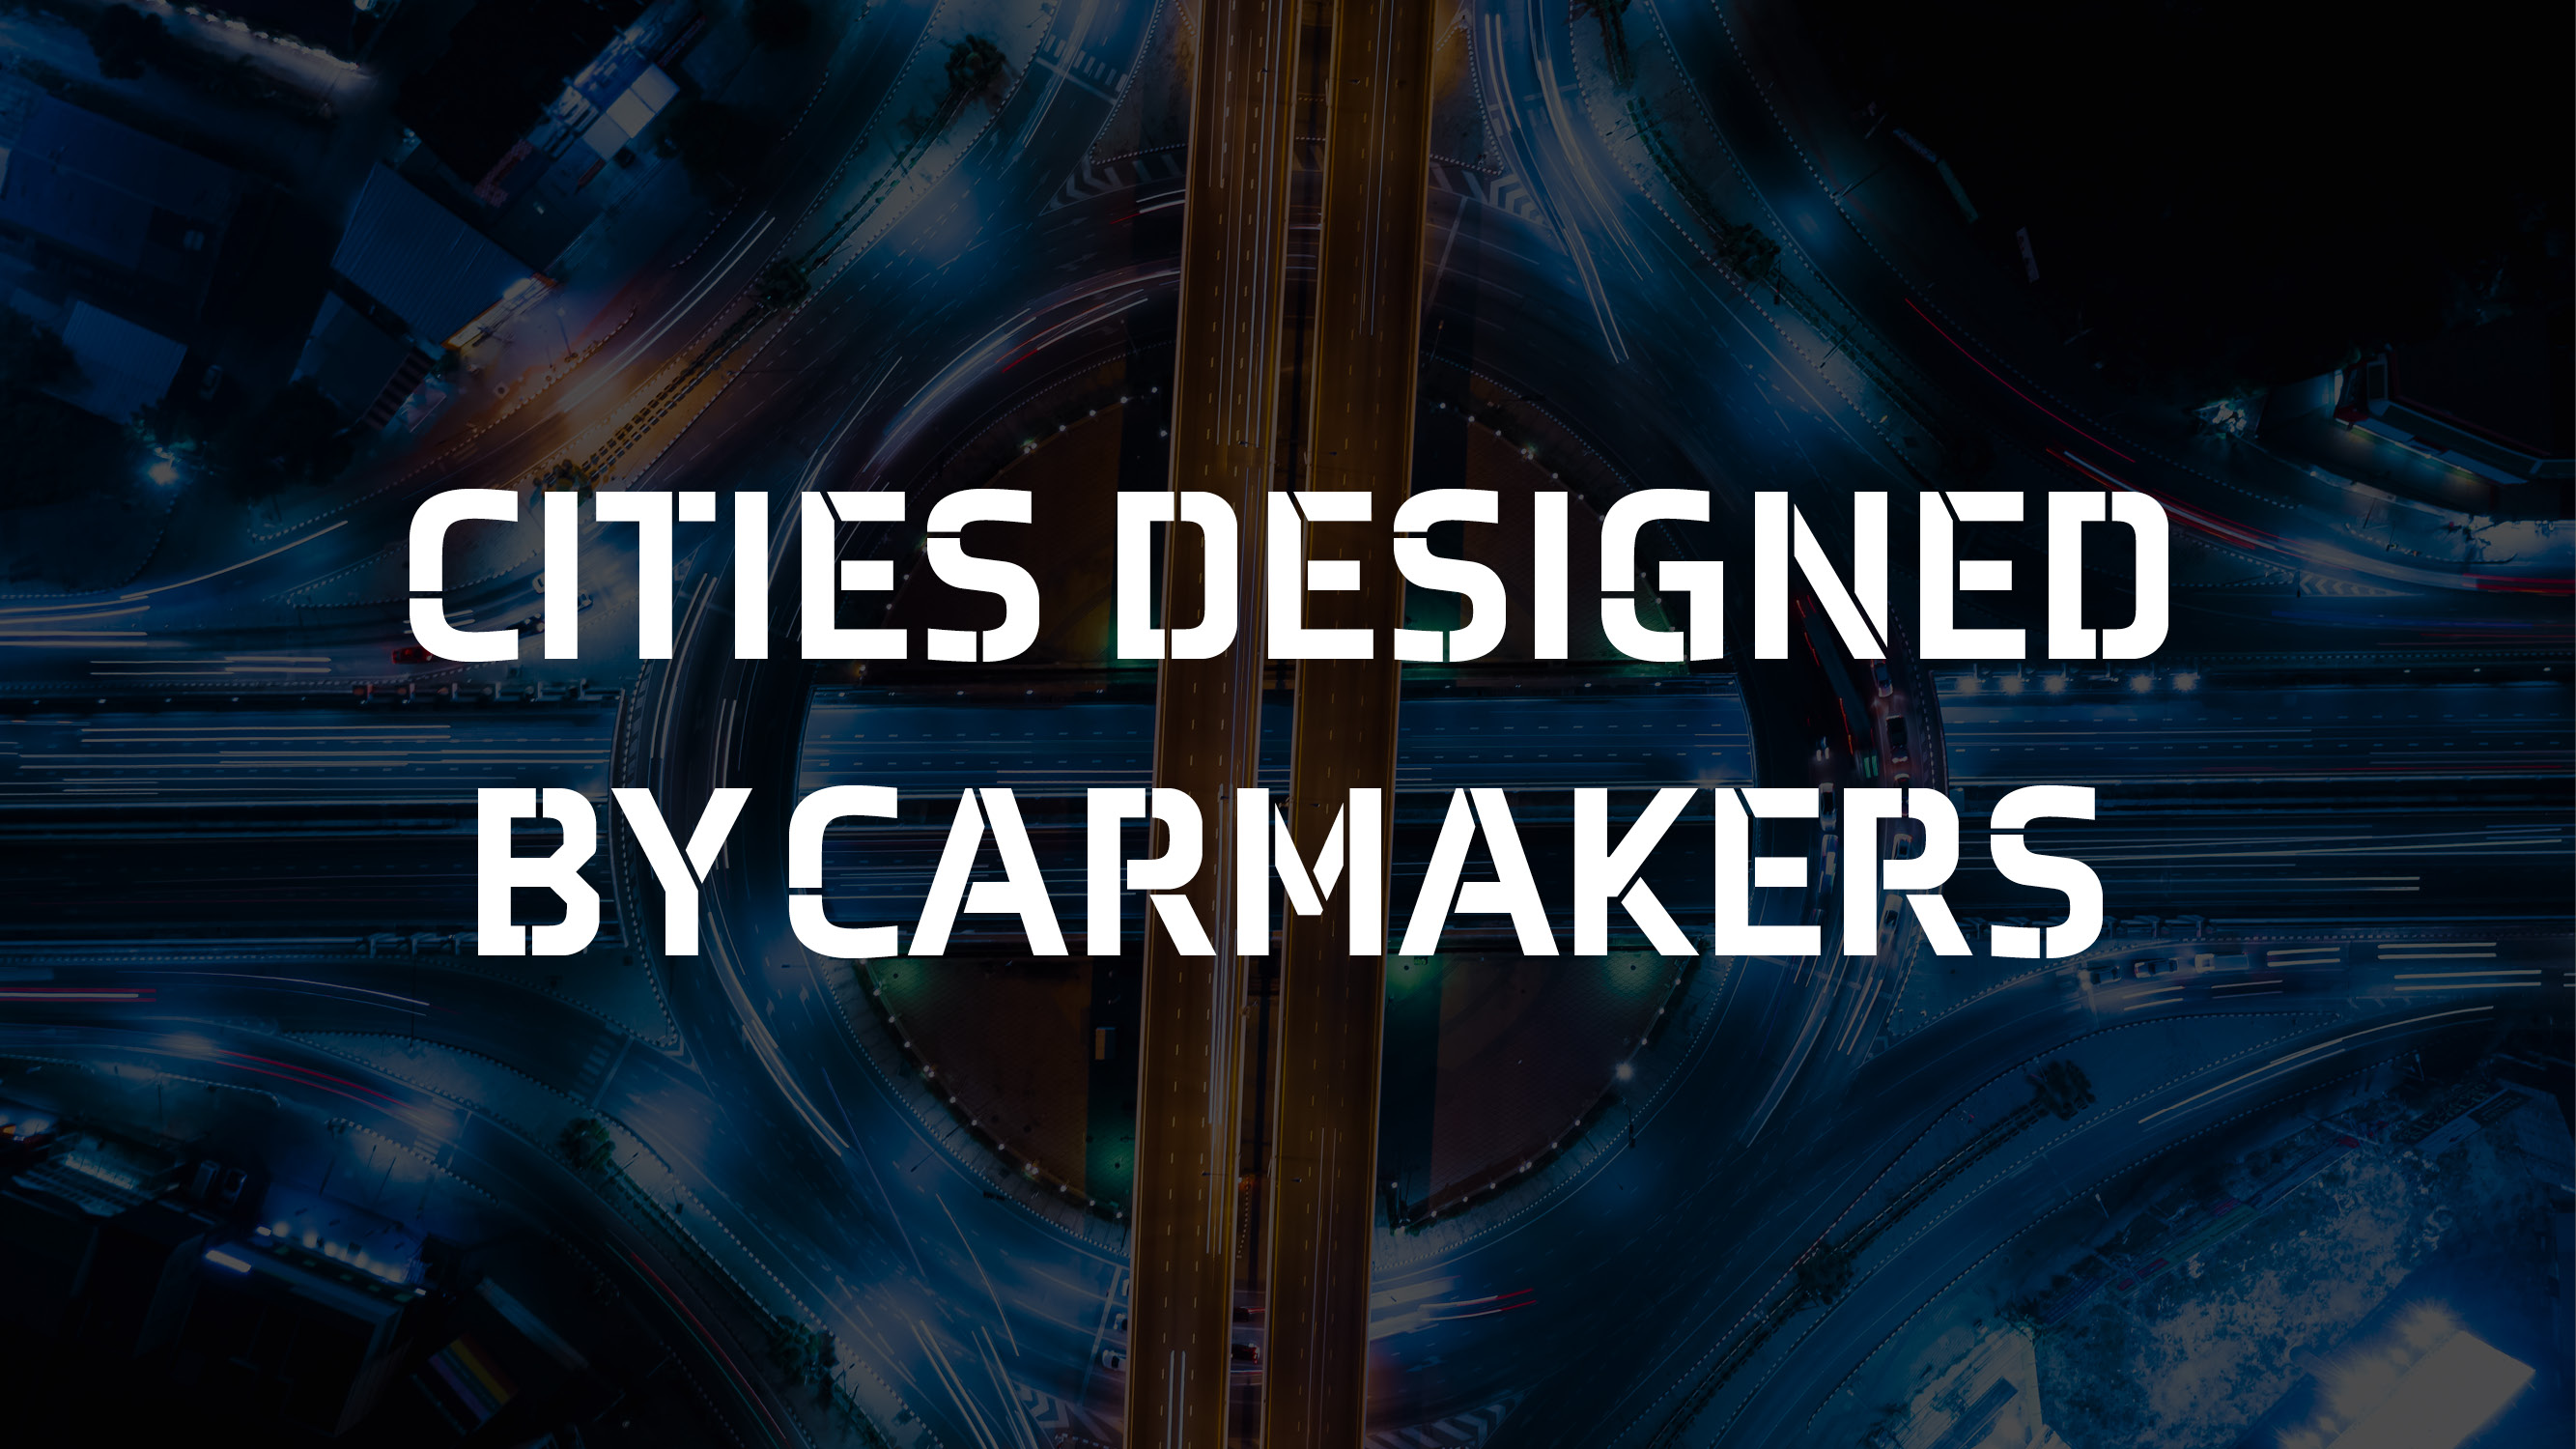 Cities designed by carmakers